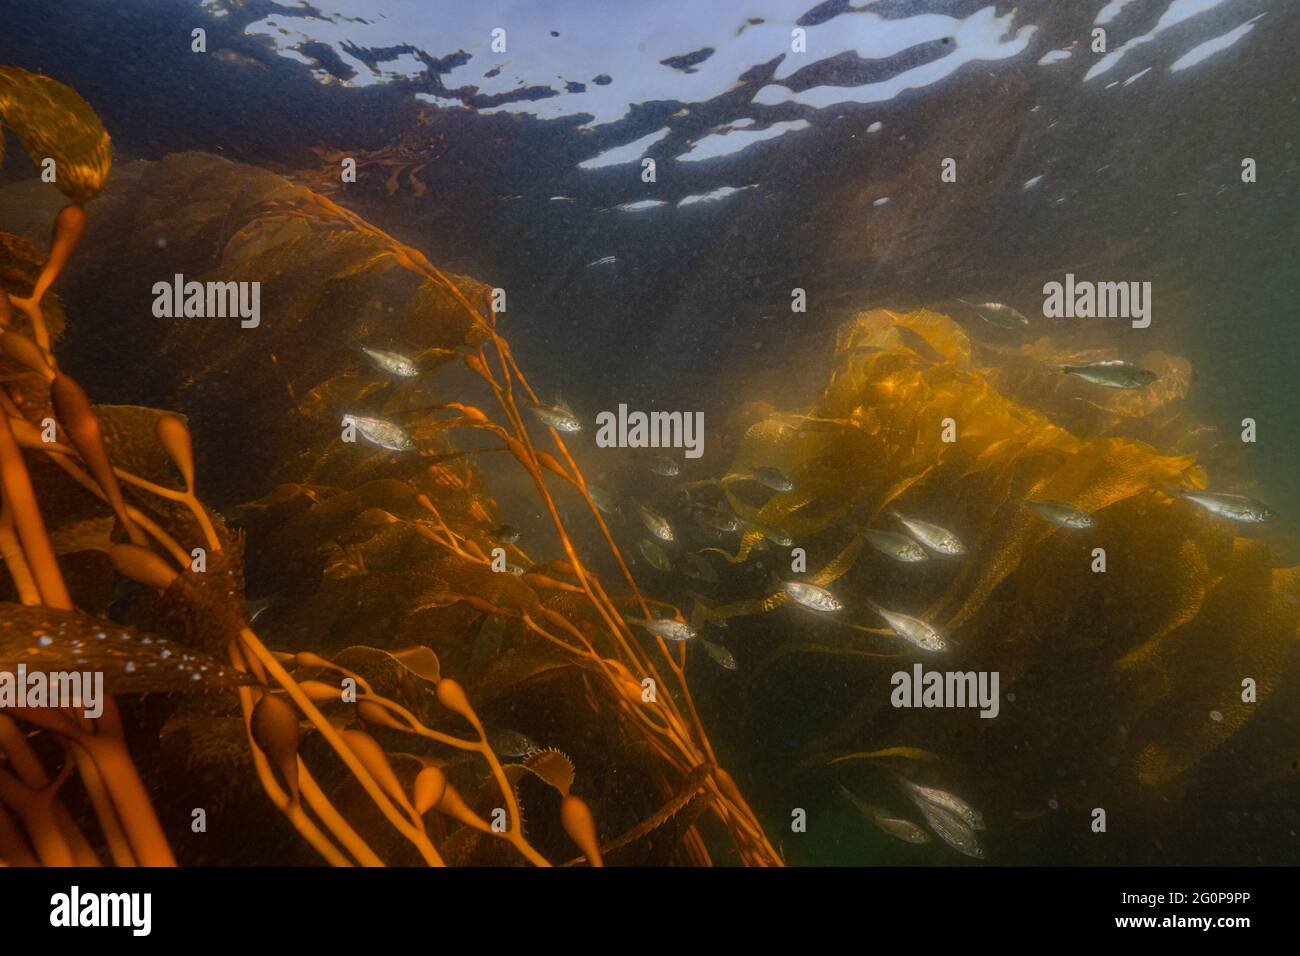 A school of Shiner perch with Bull Kelp algae in the background. Stock Photo